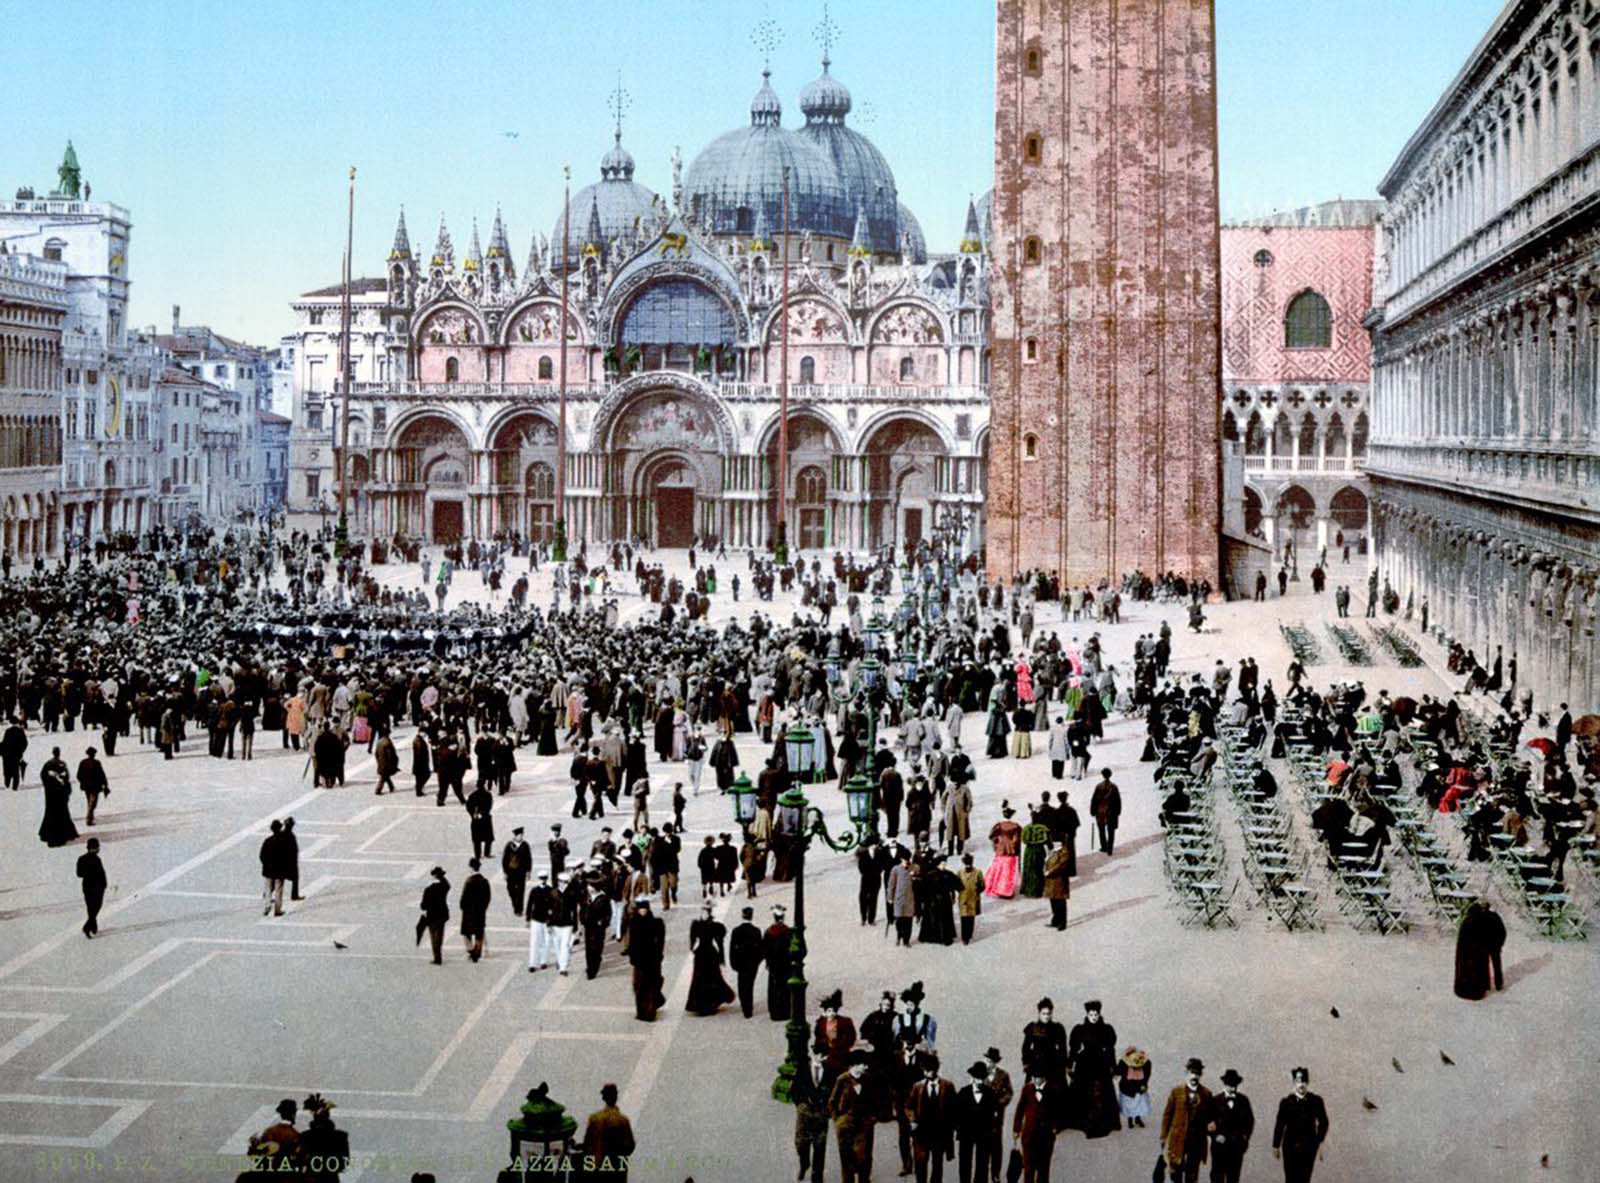 venice-in-beautiful-old-color-images-1890_7.jpg